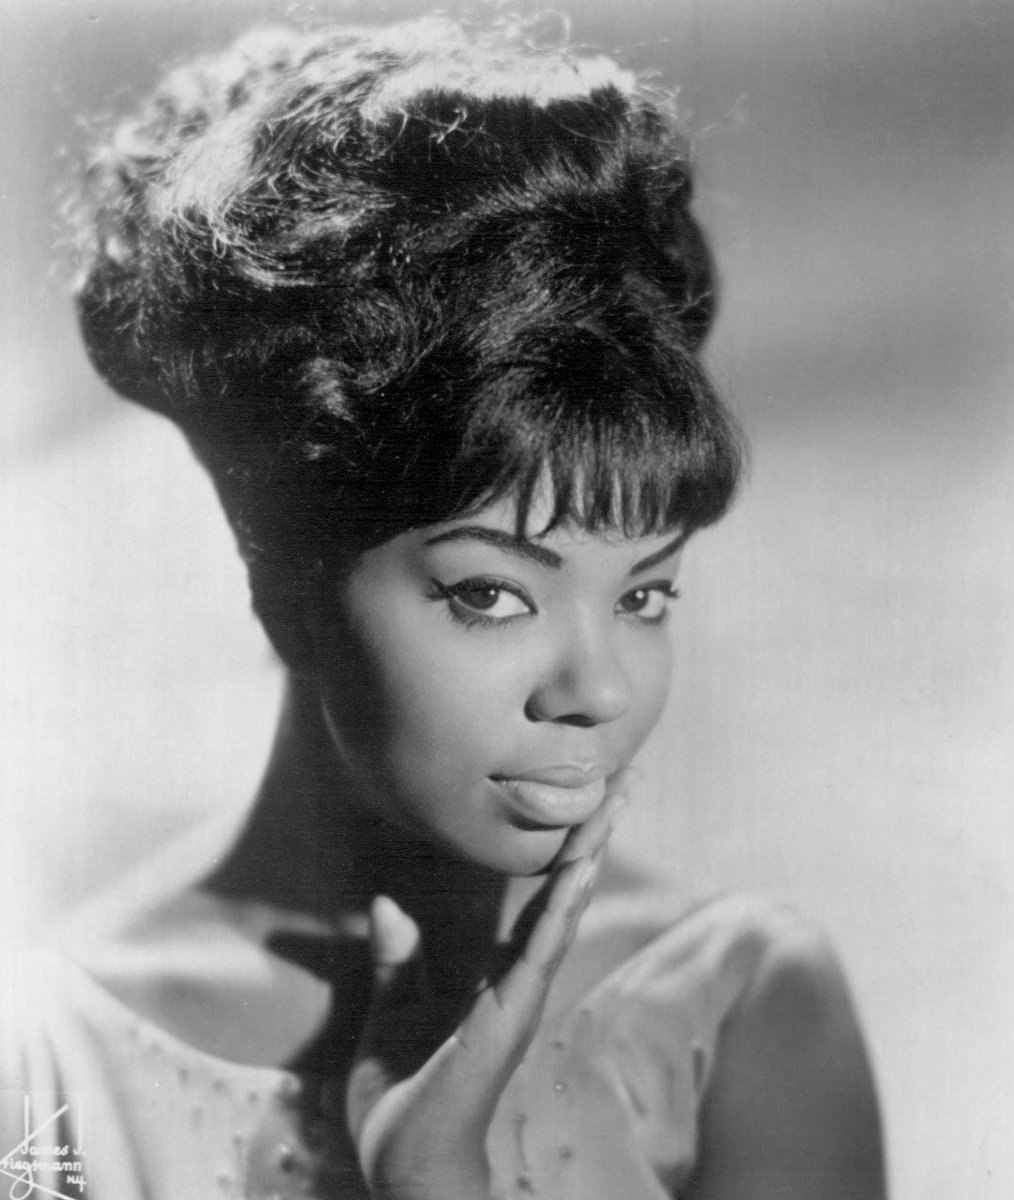 Mary Wells (1943-1992) — was a pioneering American singer-songwriter who rose to fame in the early 1960s as a leading artist in the Motown genre. Known as the 'Queen of Motown,' Wells was one of the label's first successful female artists, with hits like 'My Guy' and 'You Beat Me…